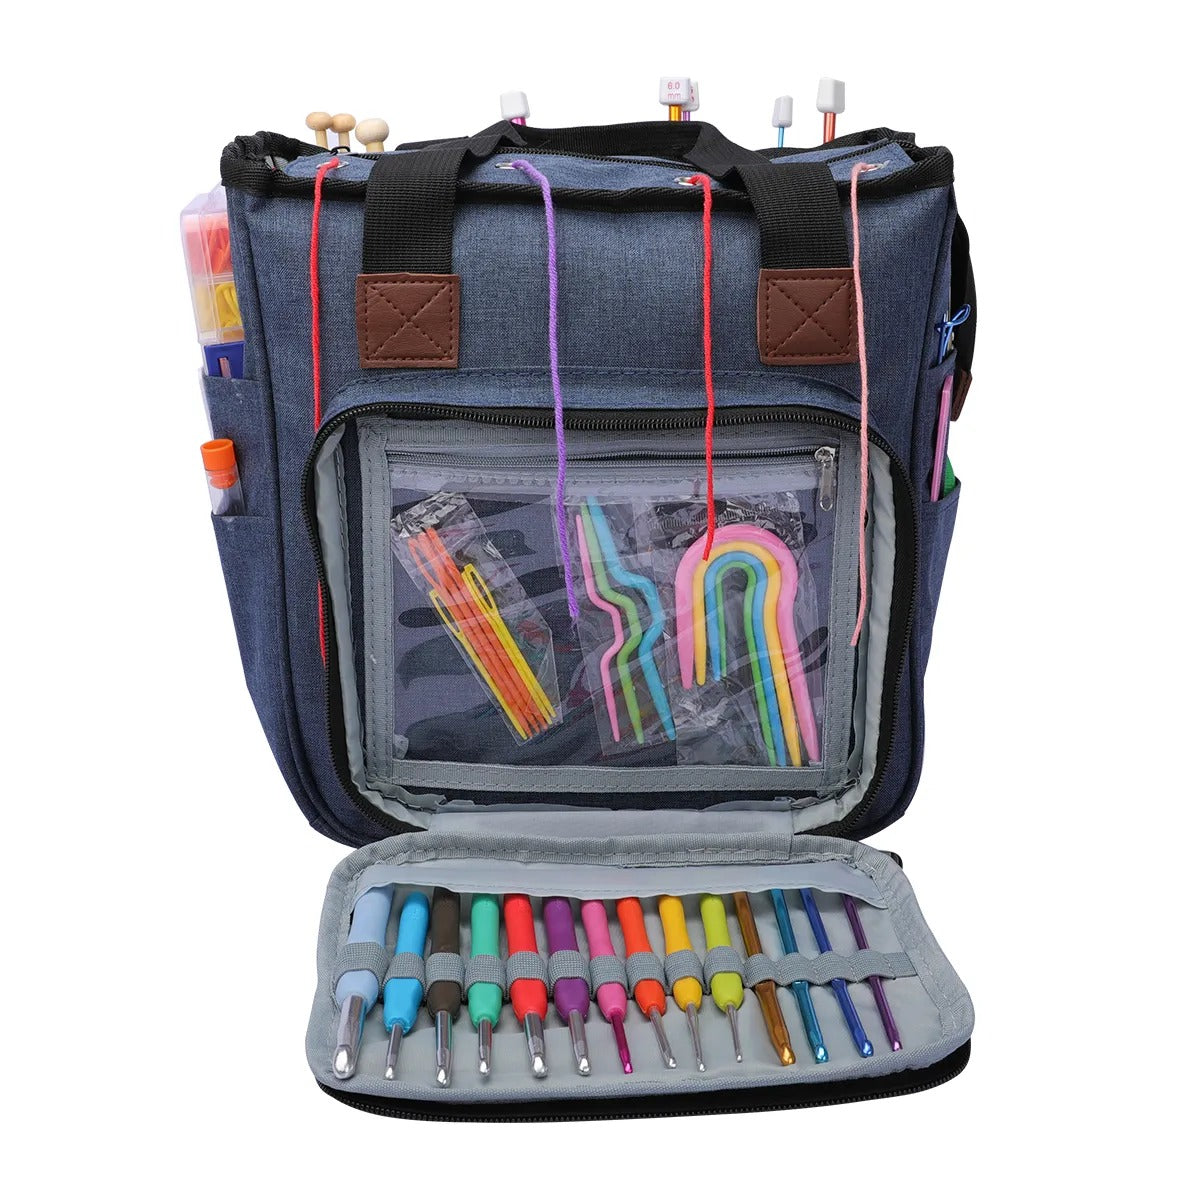 A well-organized Yarn Organizer Tote with colorful markers and knitting essentials.